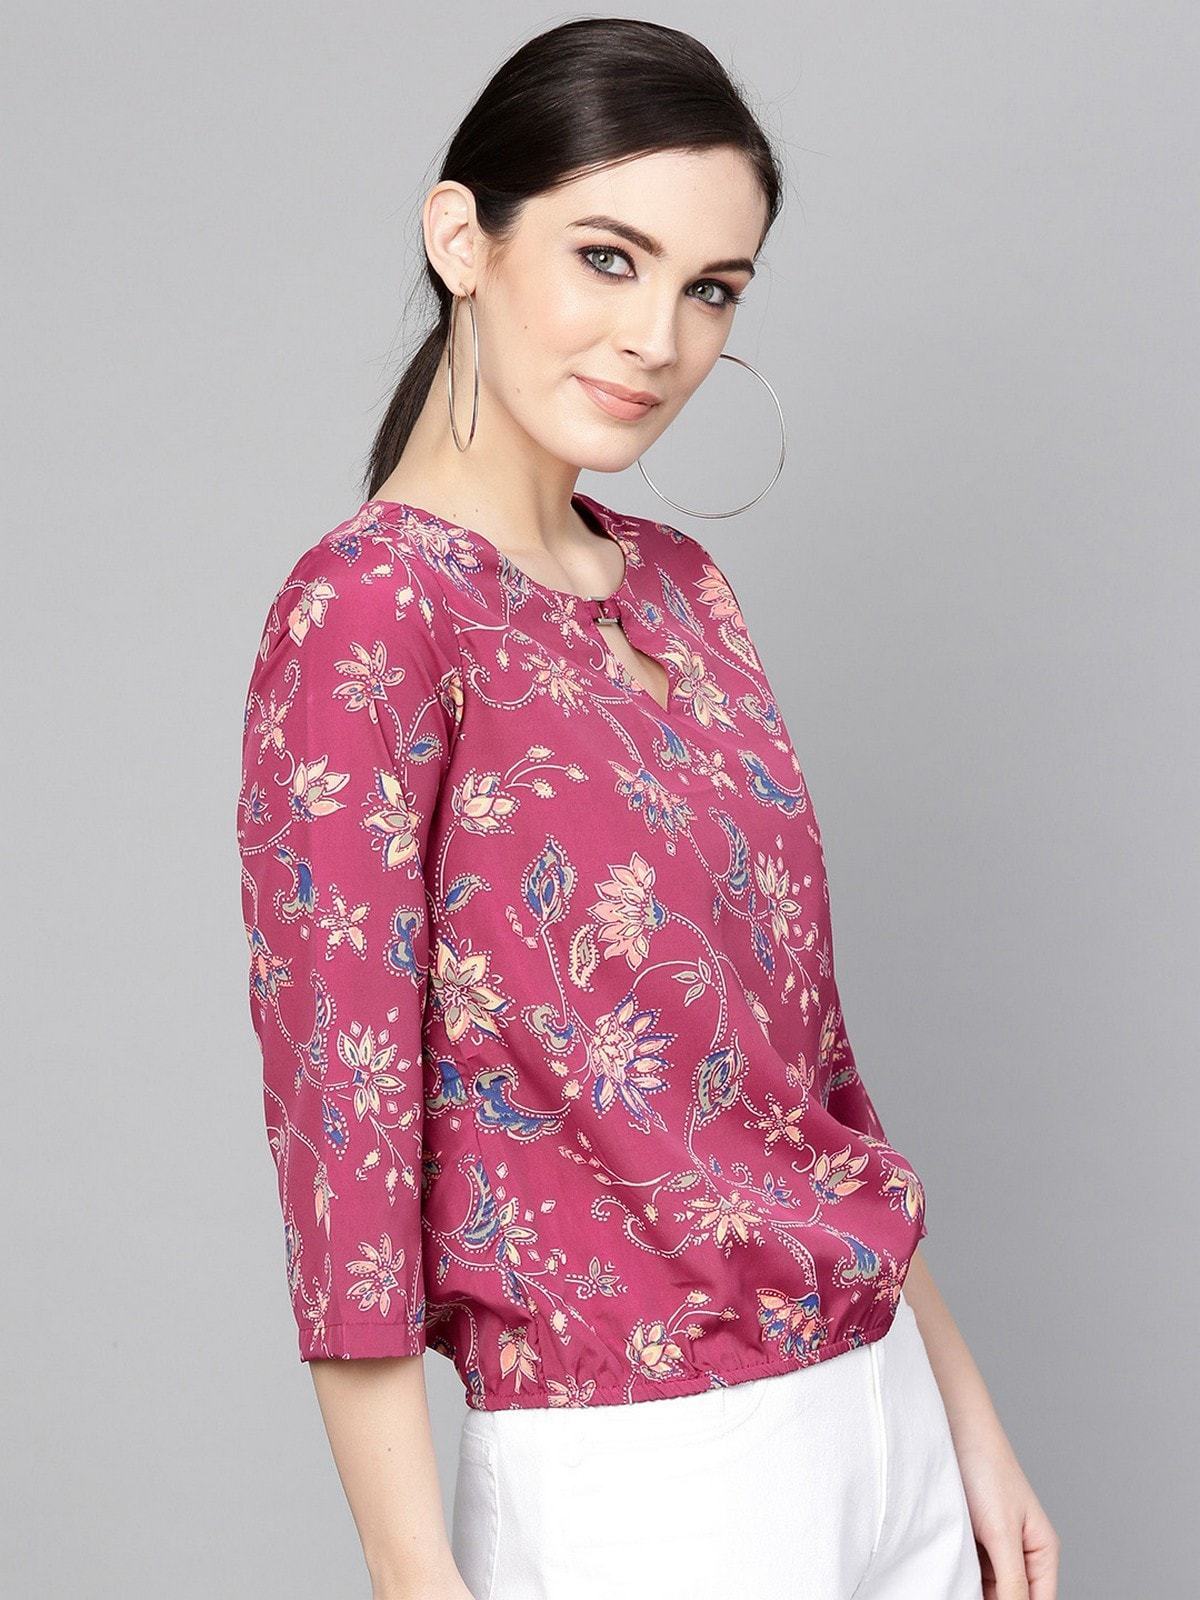 Women's Floral Pipe Top - Pannkh